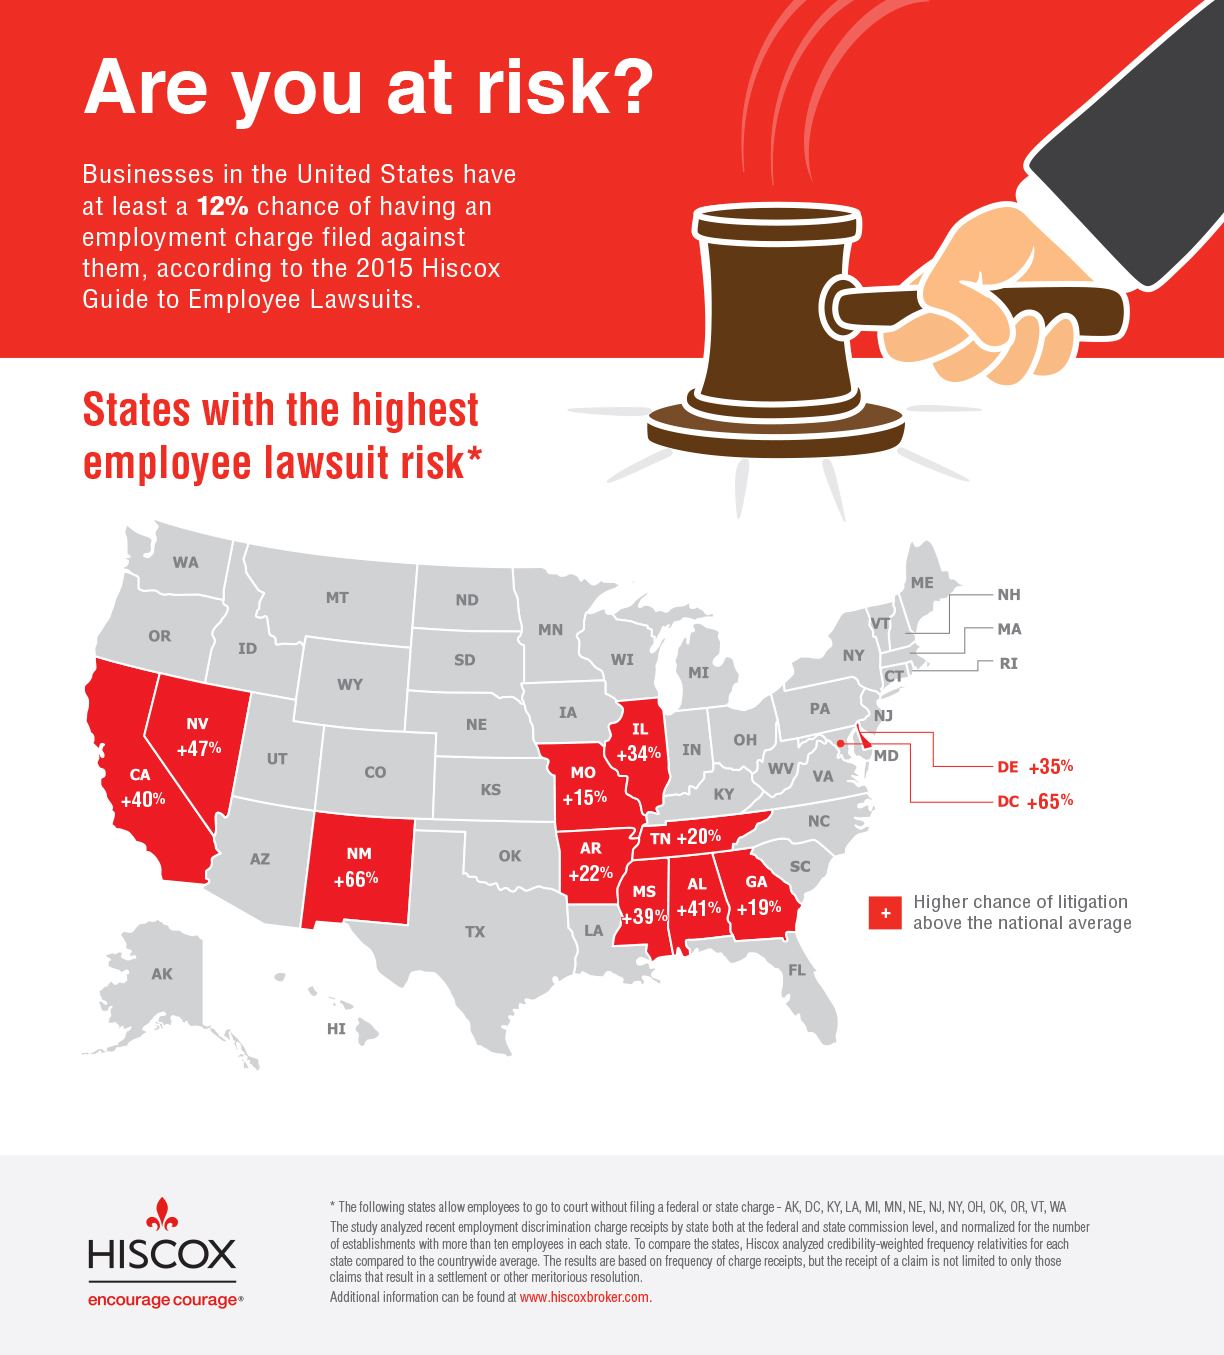 States with the highest employee lawsuit risk